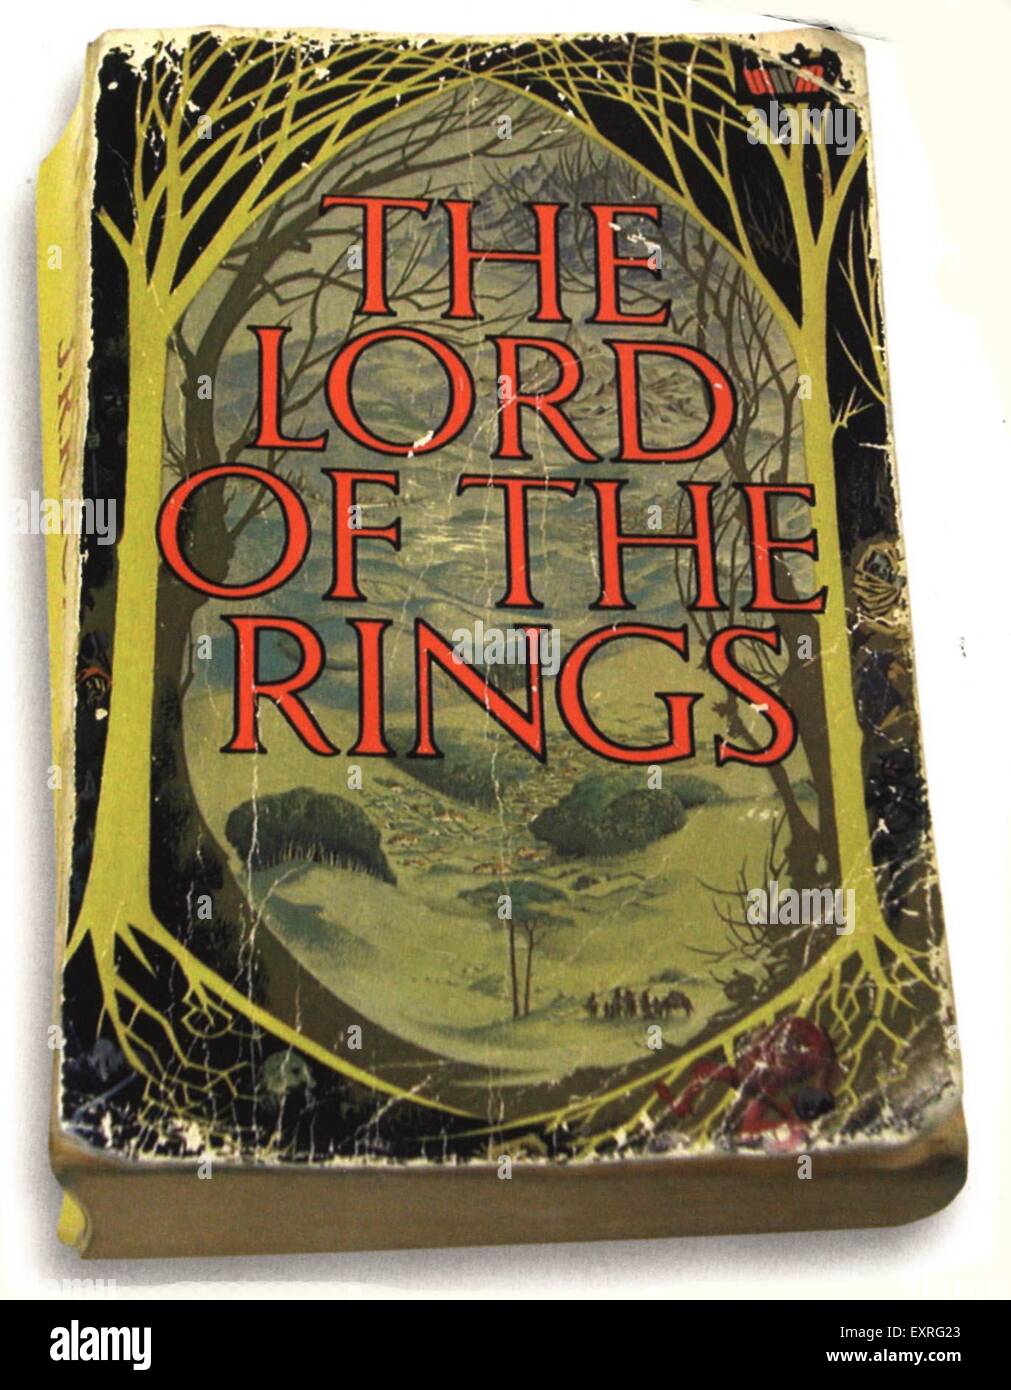 1980s UK the lord of the rings by J R R Tolkien Book Cover Stock Photo